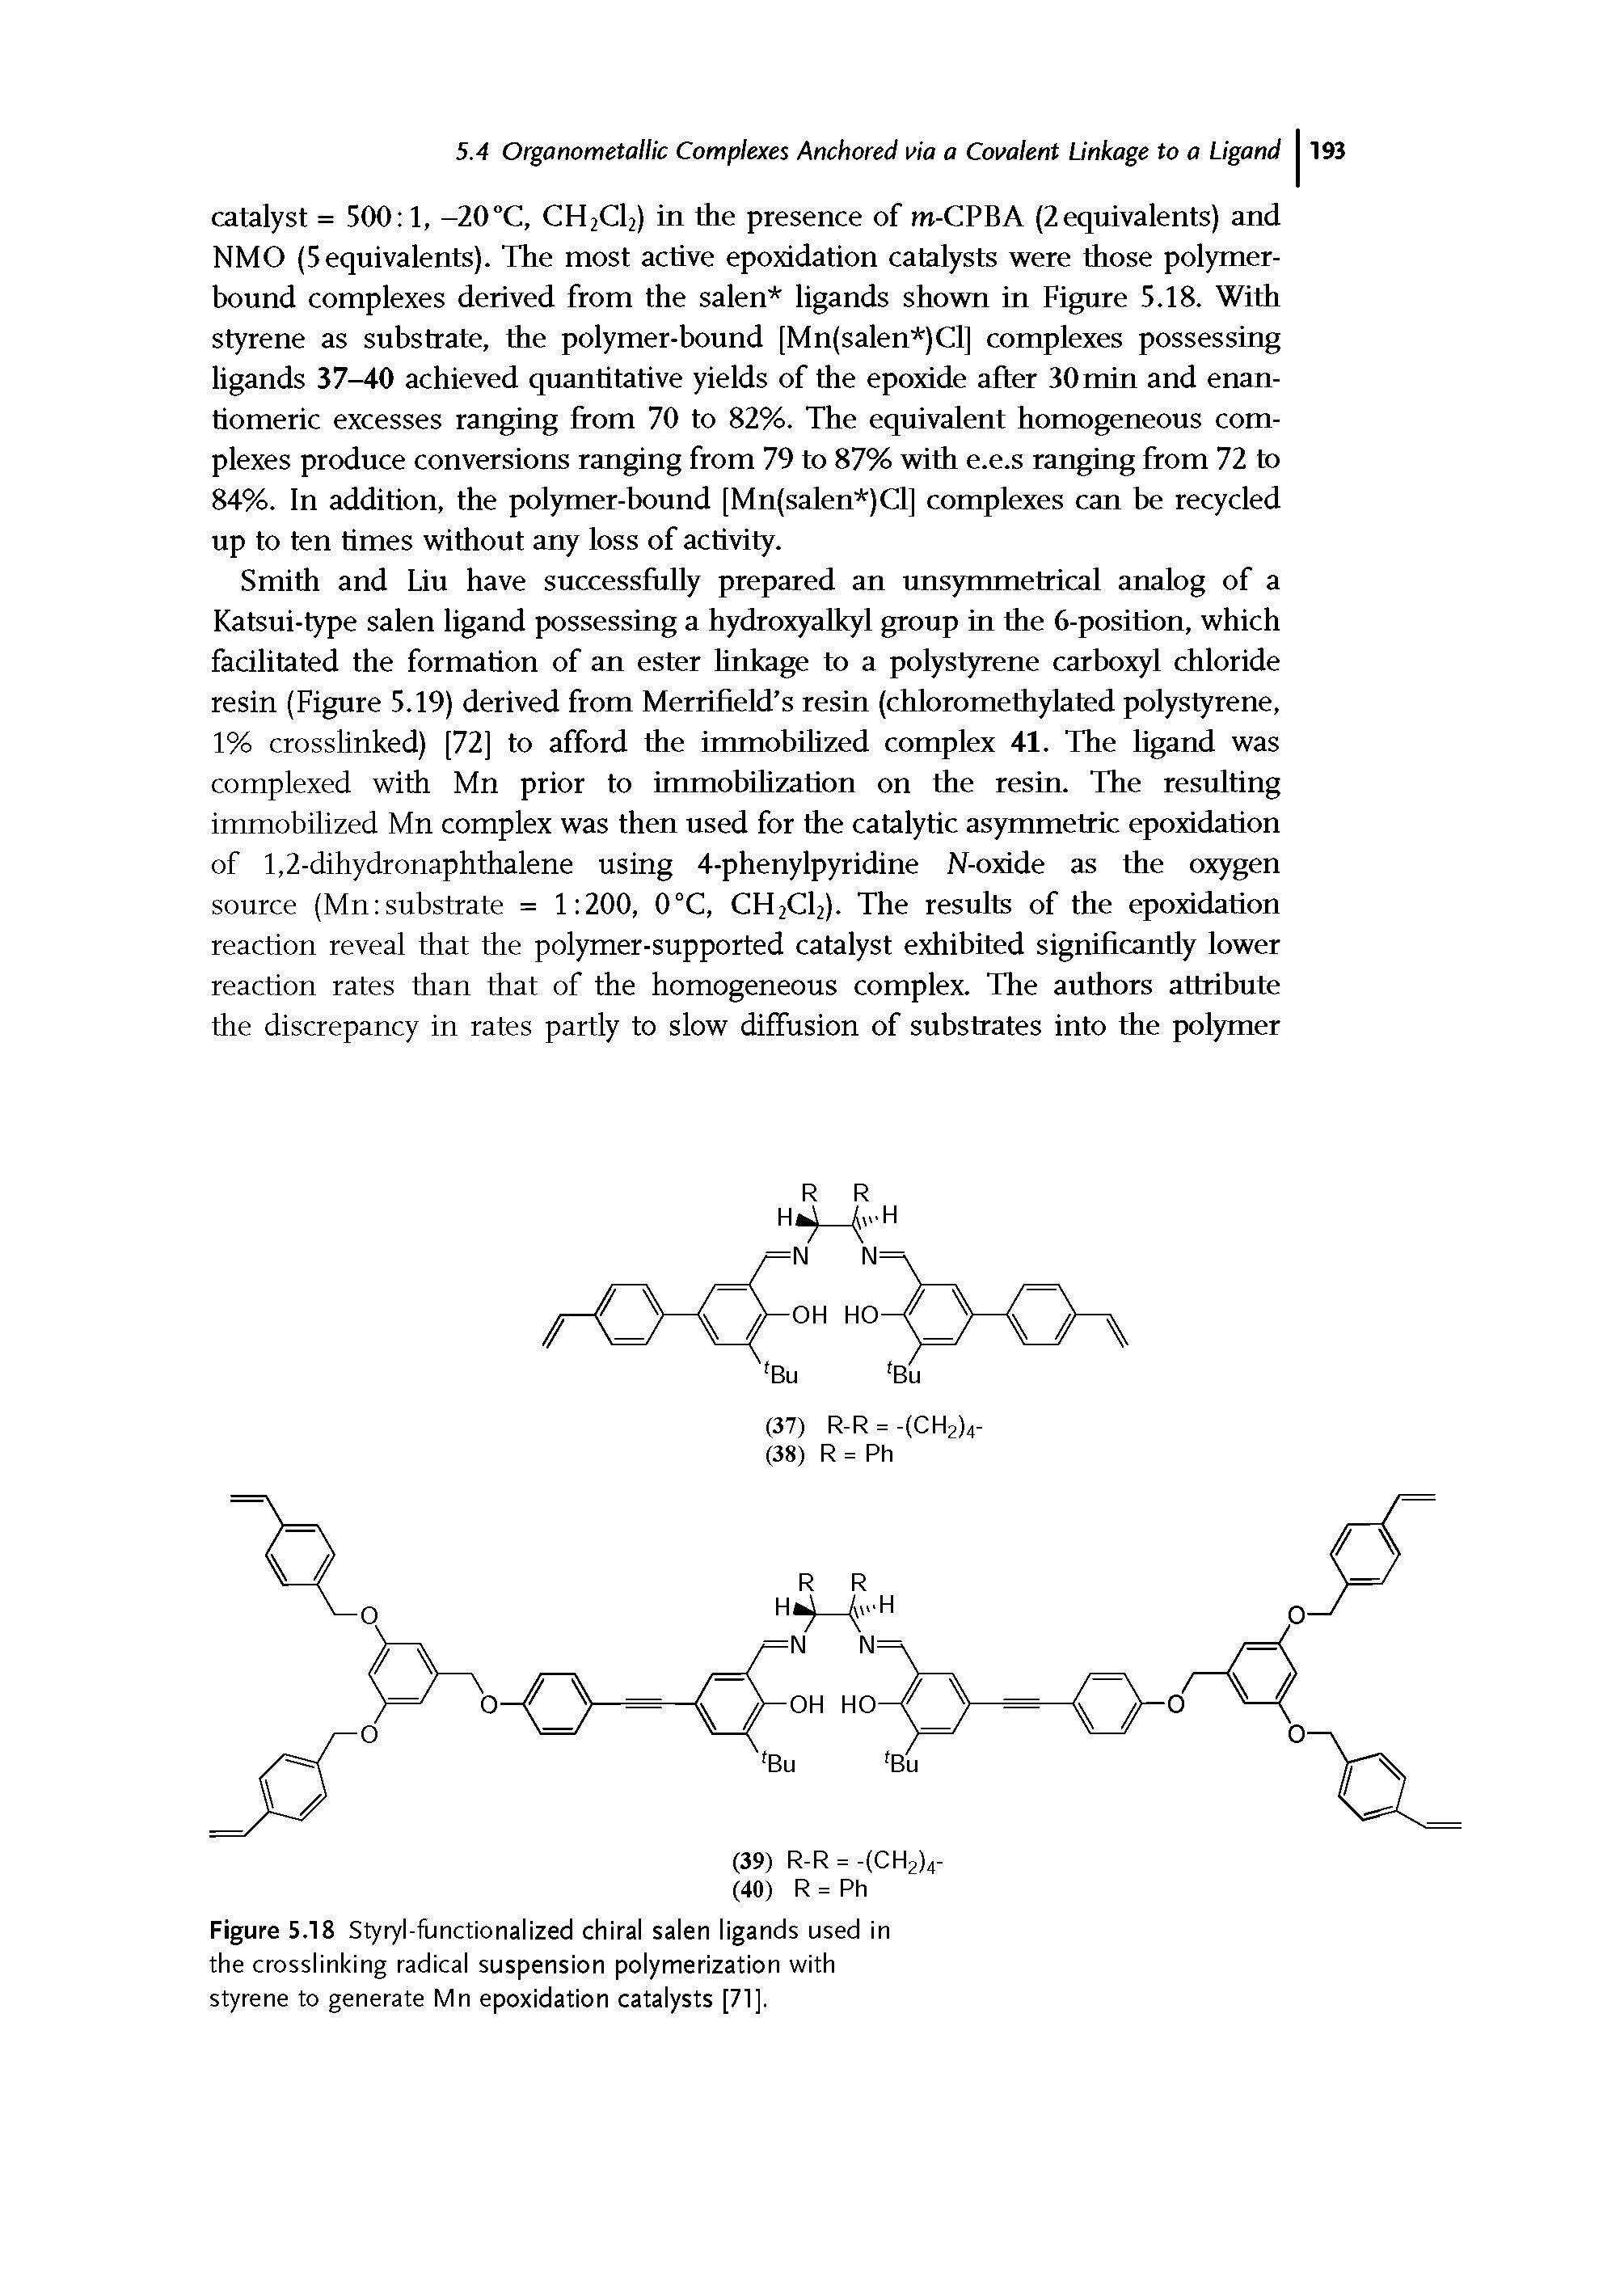 Figure 5.18 Styryl-functionalized chiral salen ligands used in the crosslinking radical suspension polymerization with styrene to generate Mn epoxidation catalysts [71].